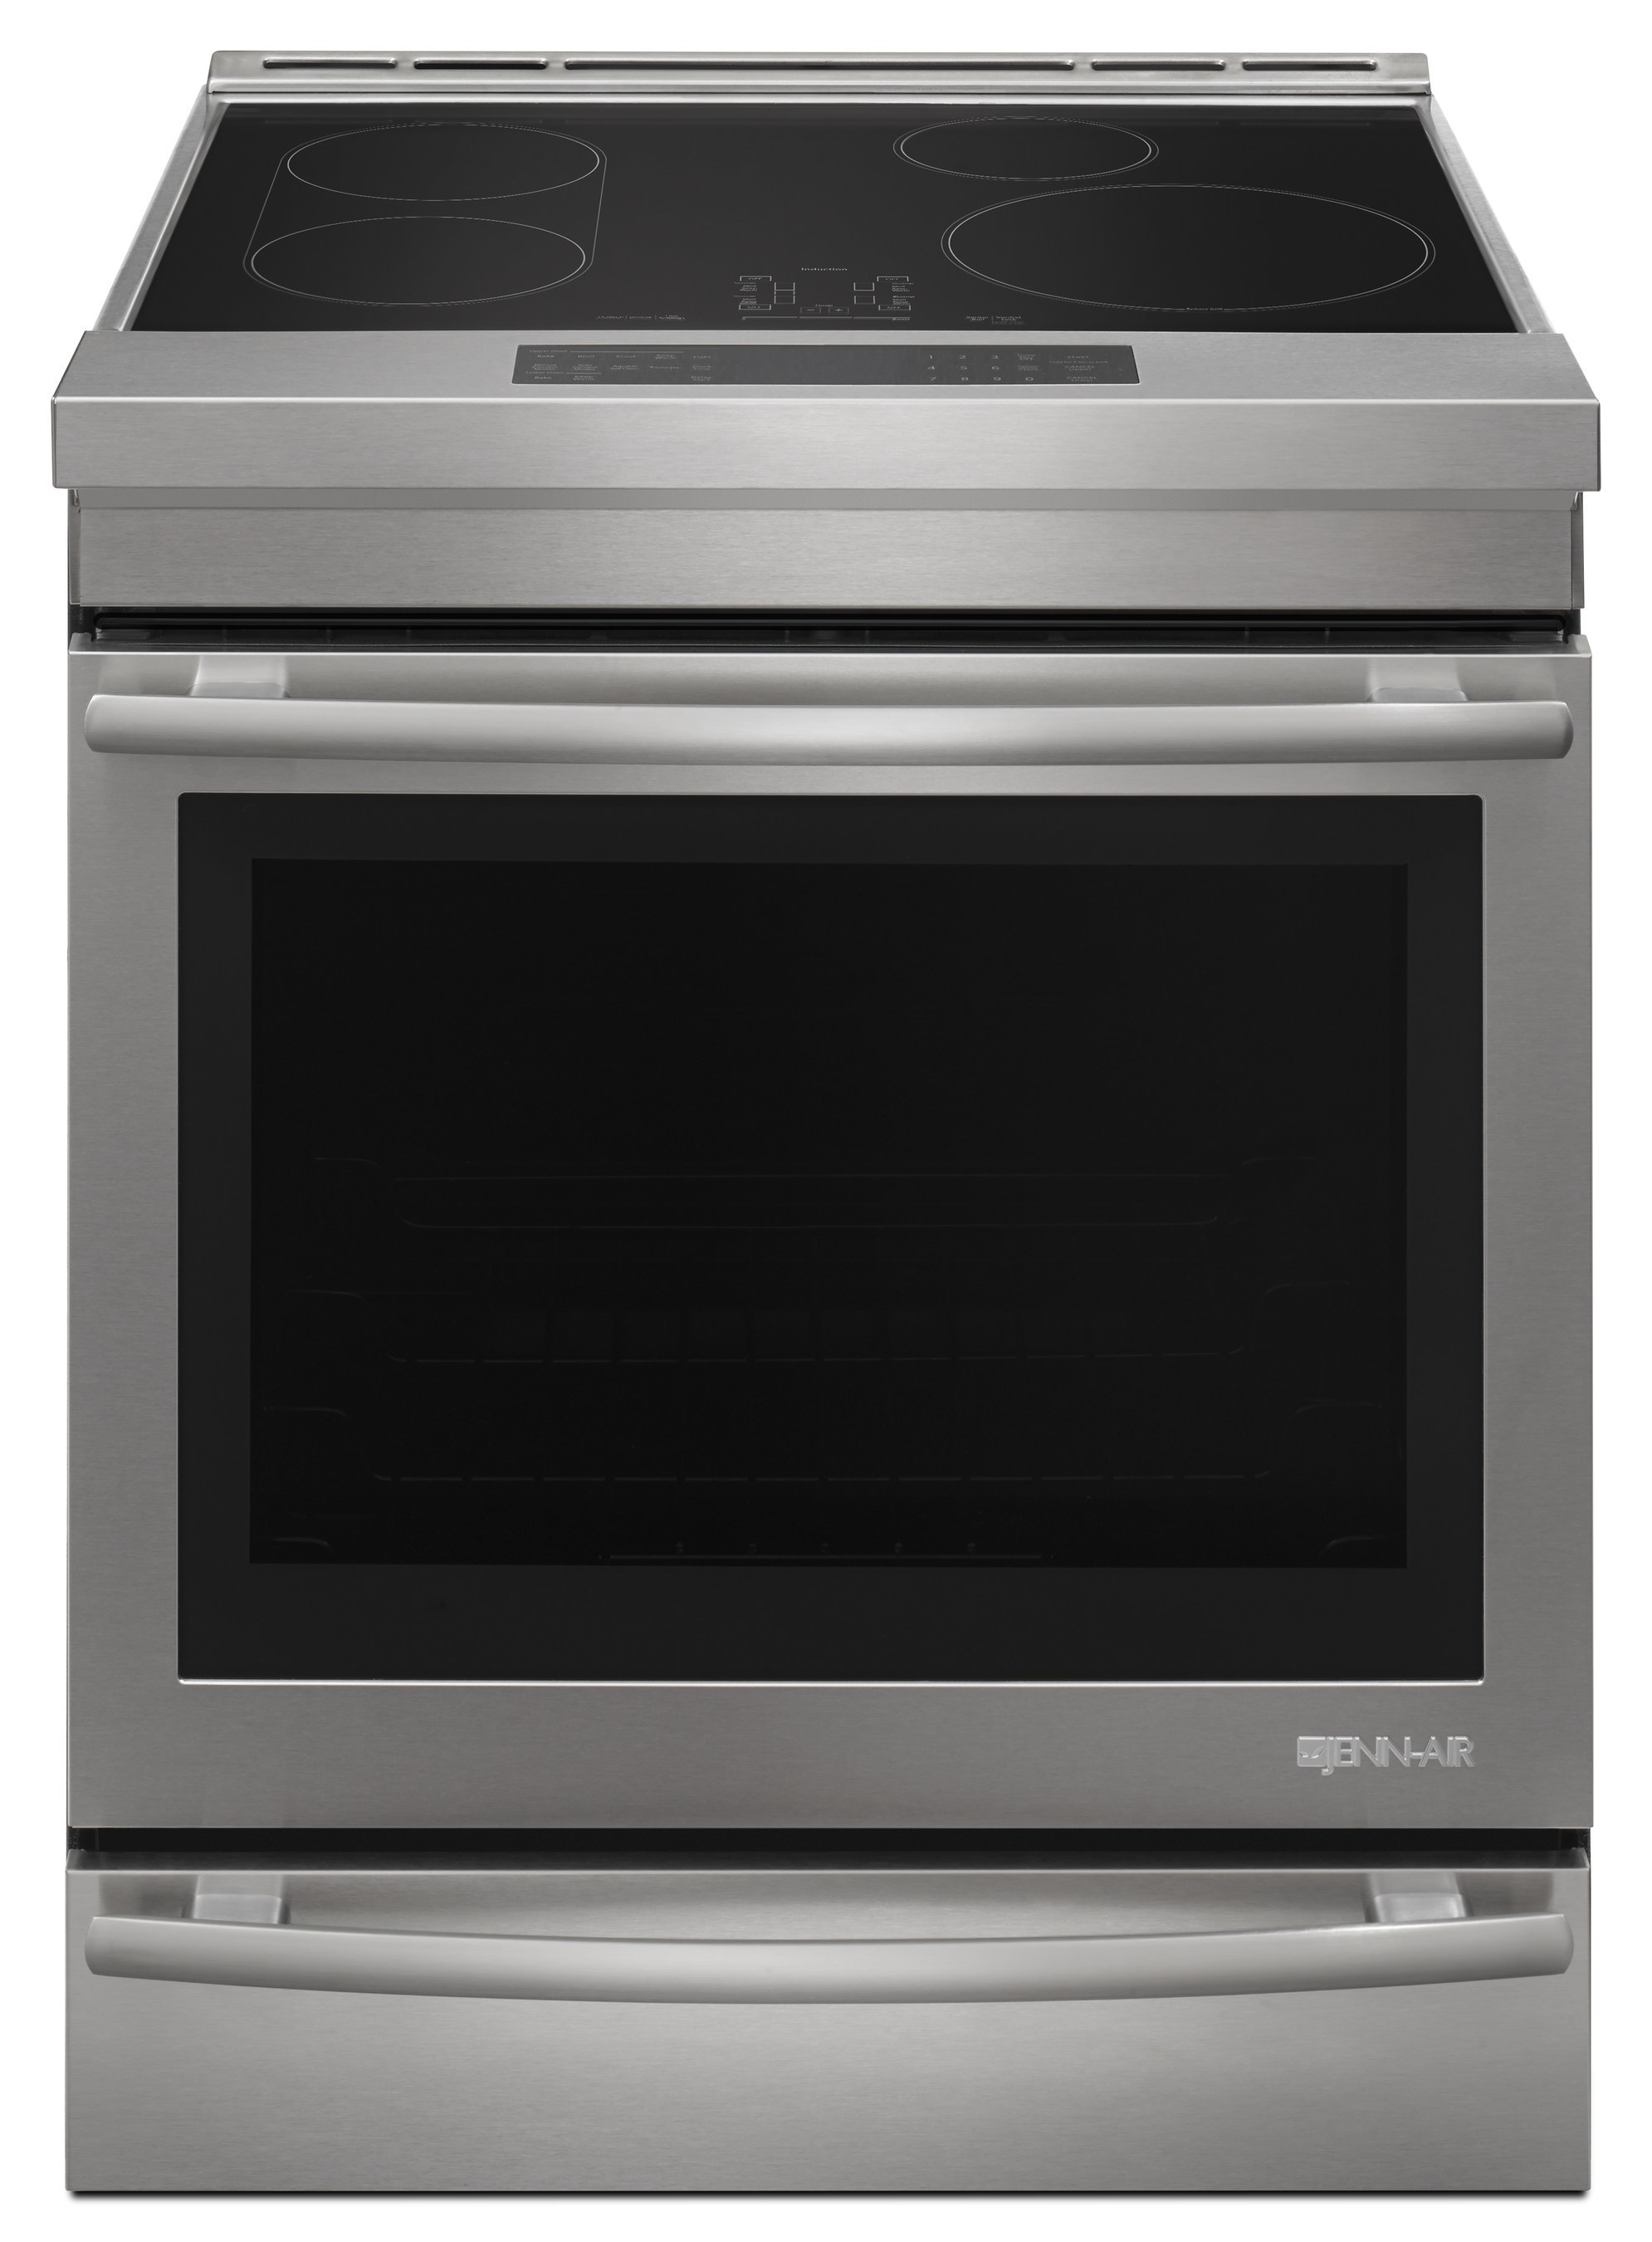 Featuring a full-depth design that easily installs seamlessly into a standard opening, the new Jenn-Air induction range offers increased oven baking capacity and a host of luxury details, from soft-close oven doors to telescoping glide racks.